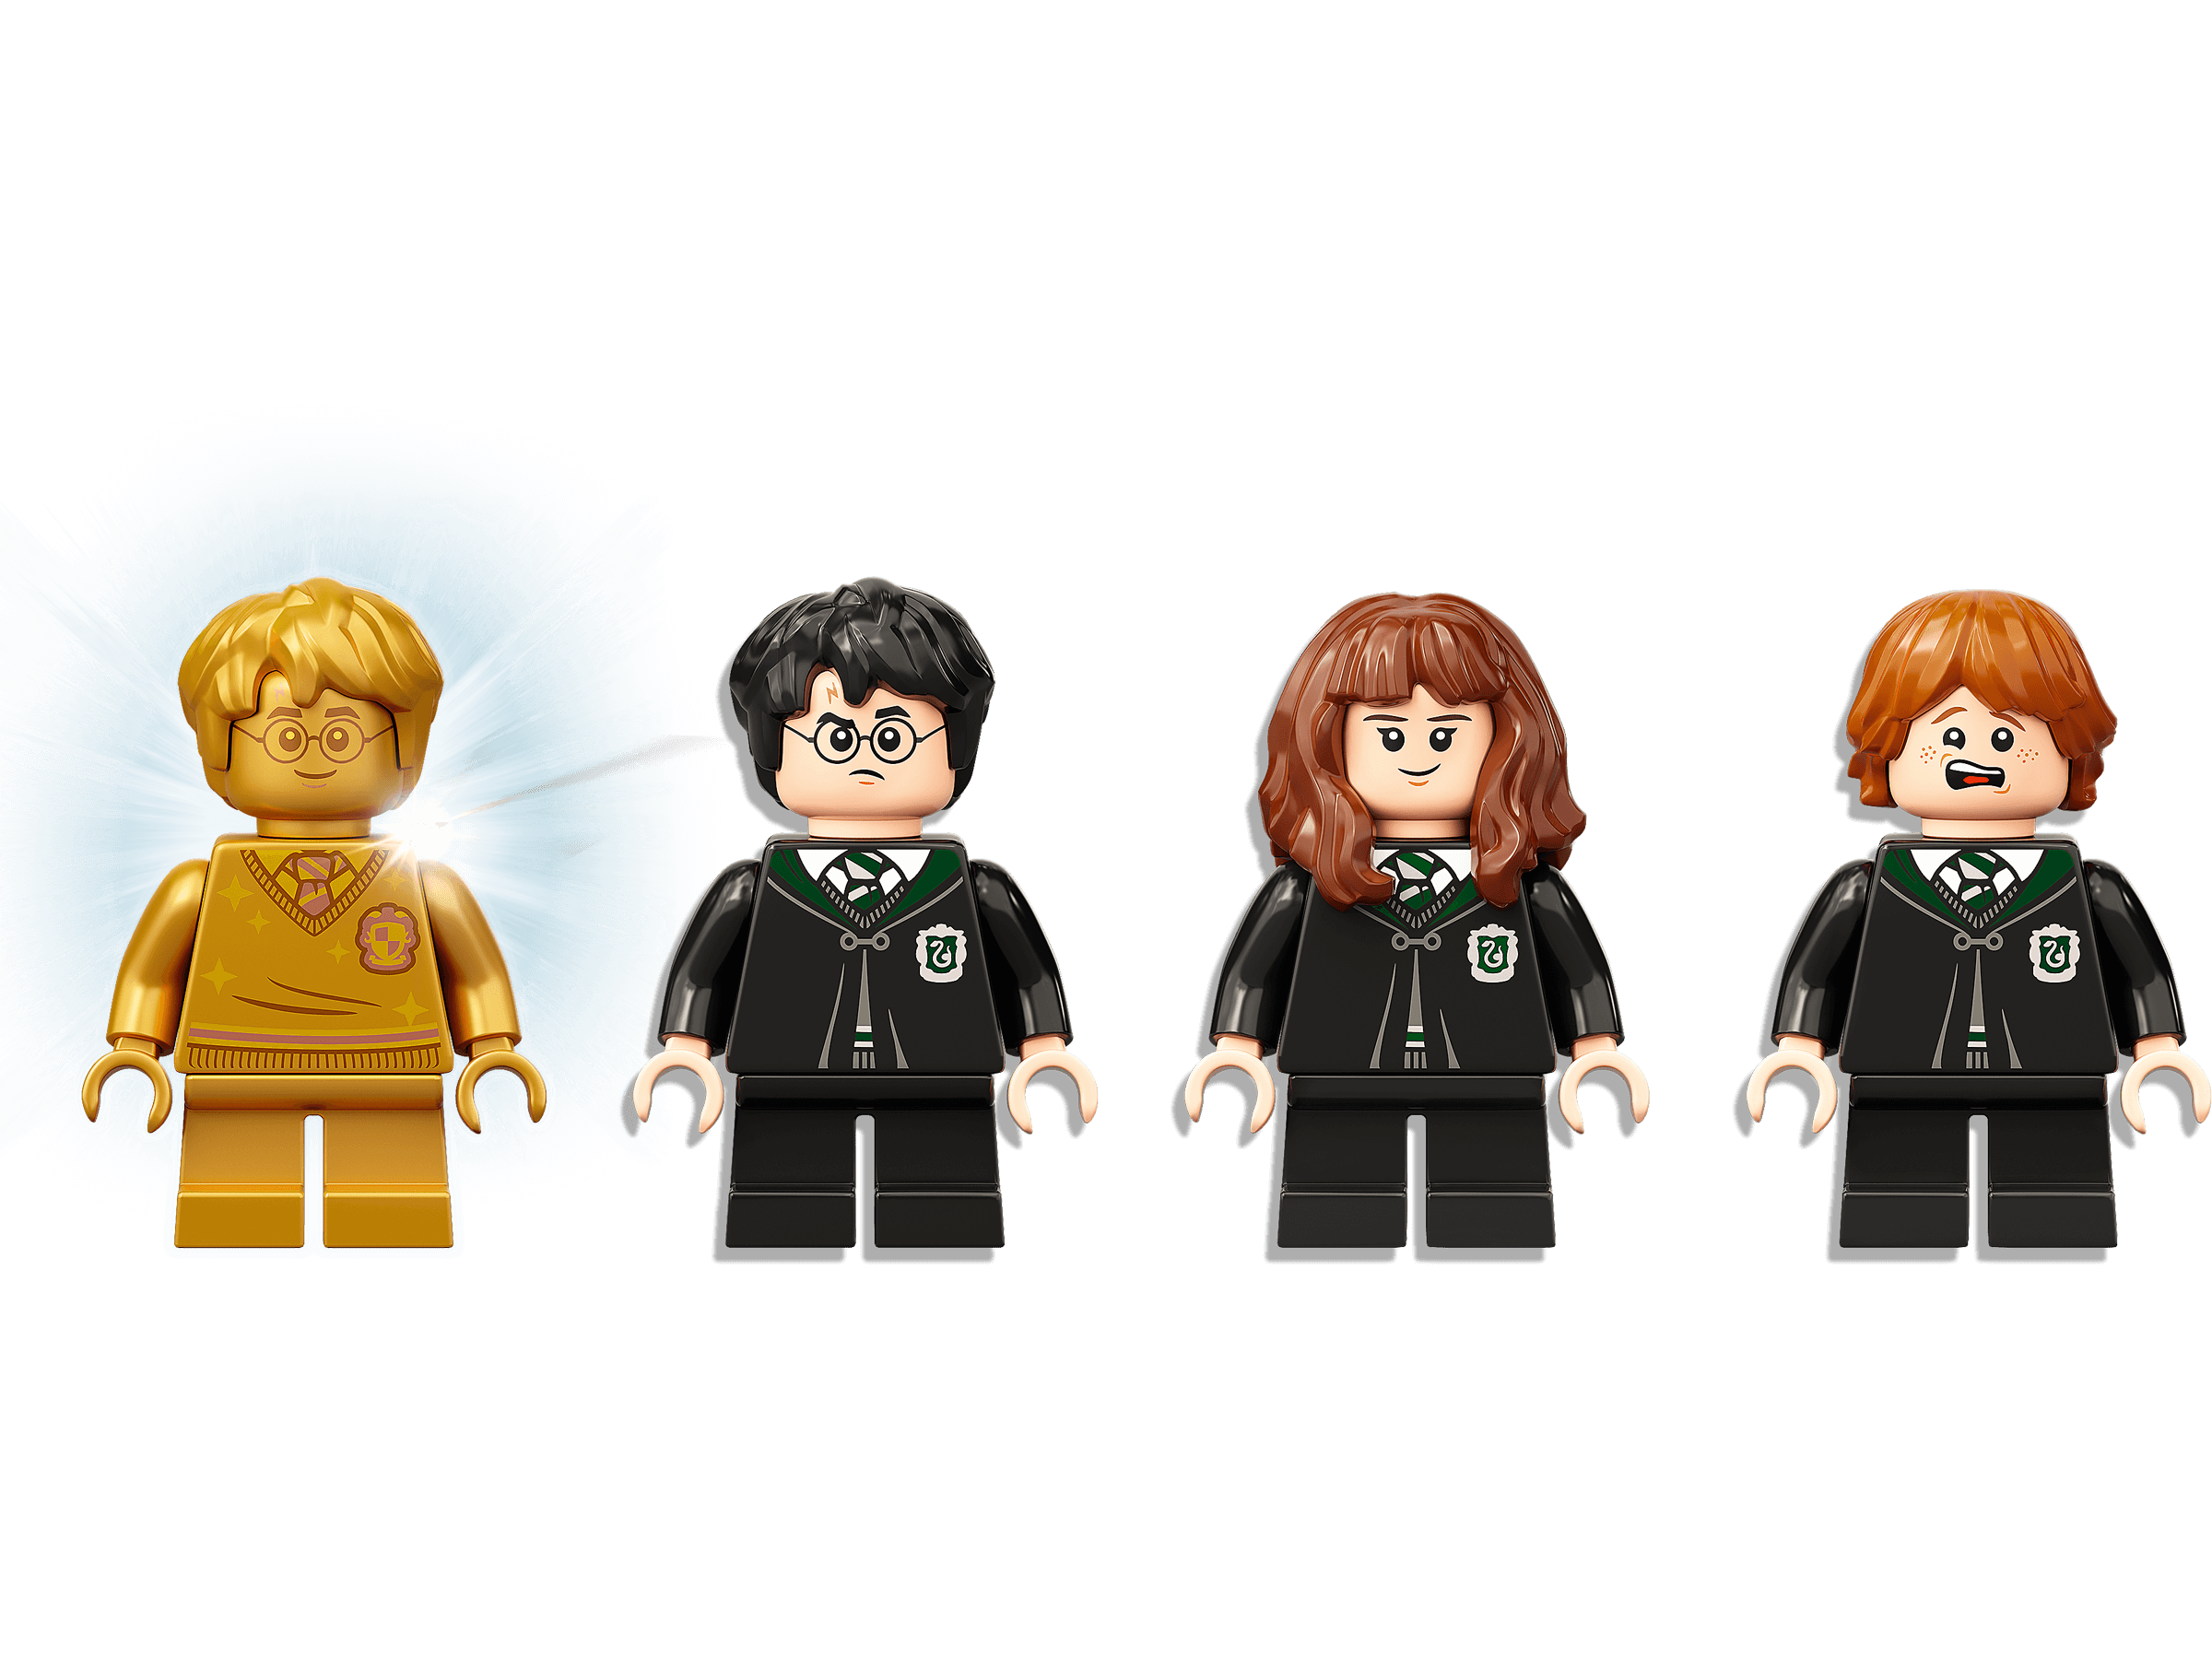 Hogwarts™: Polyjuice Potion Mistake 76386 | Harry Potter™ | Buy online at  the Official LEGO® Shop US